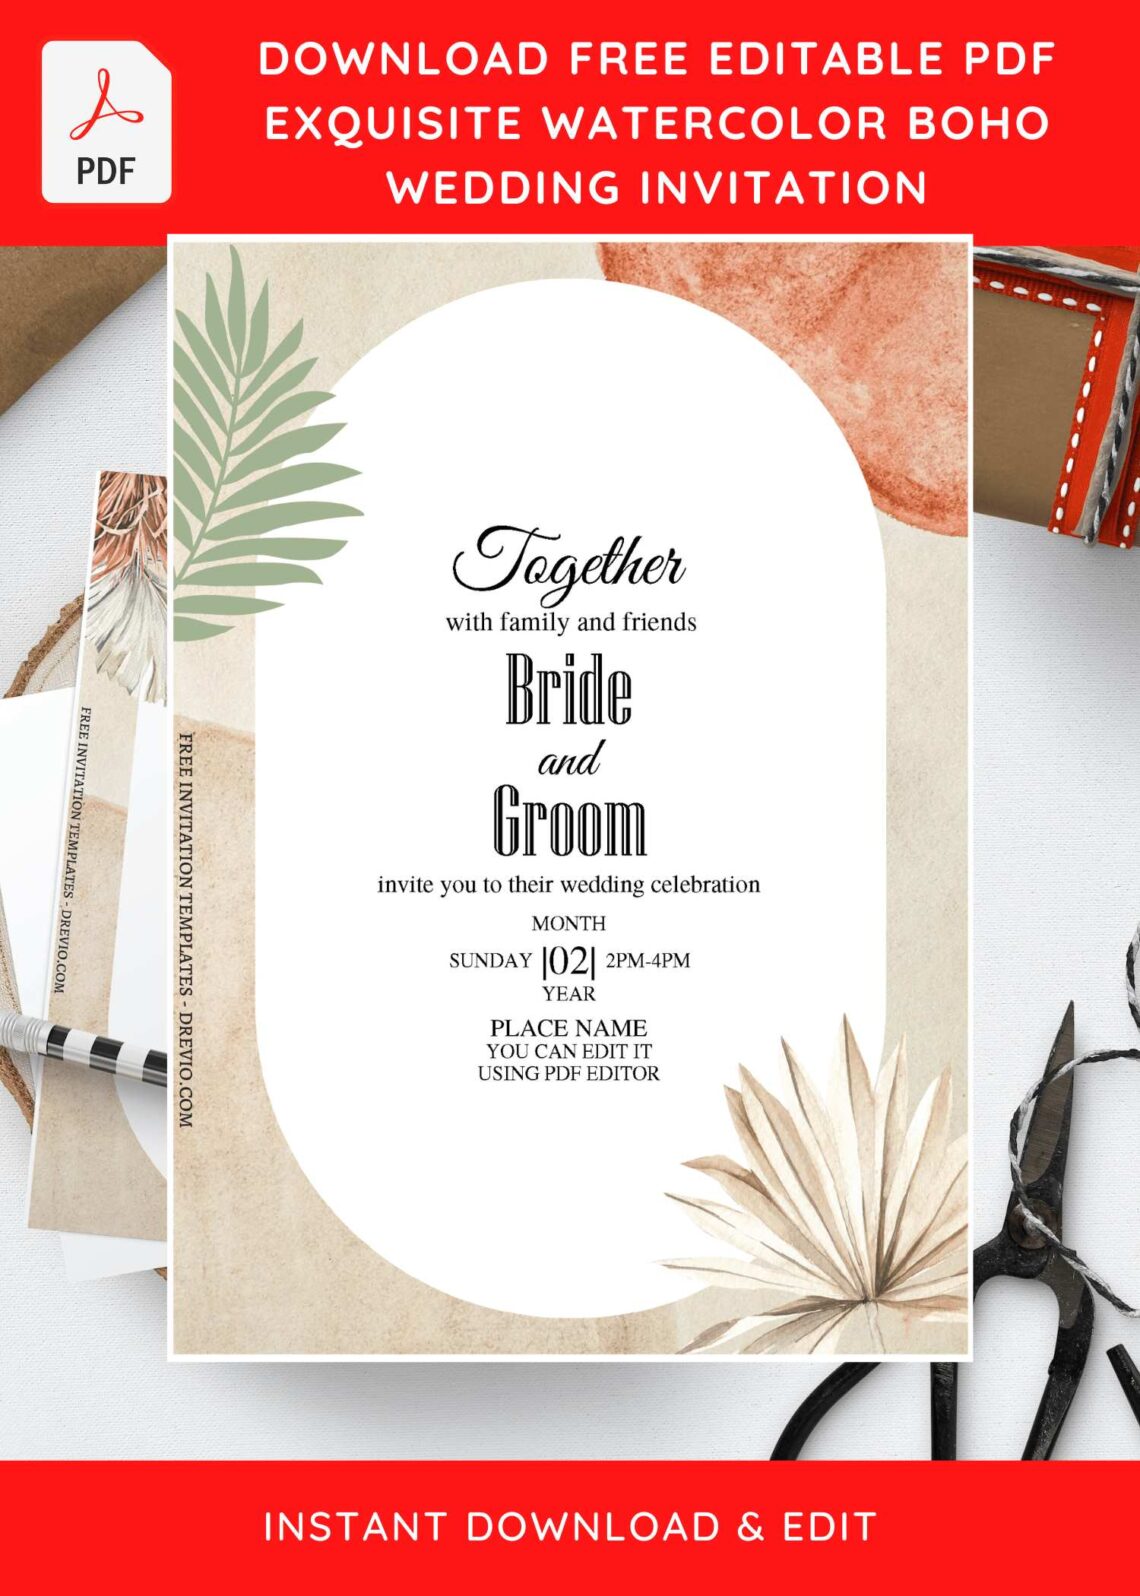 (Free Editable PDF) Ethereal Bohemian Wedding Invitation Templates with oval shaped text box